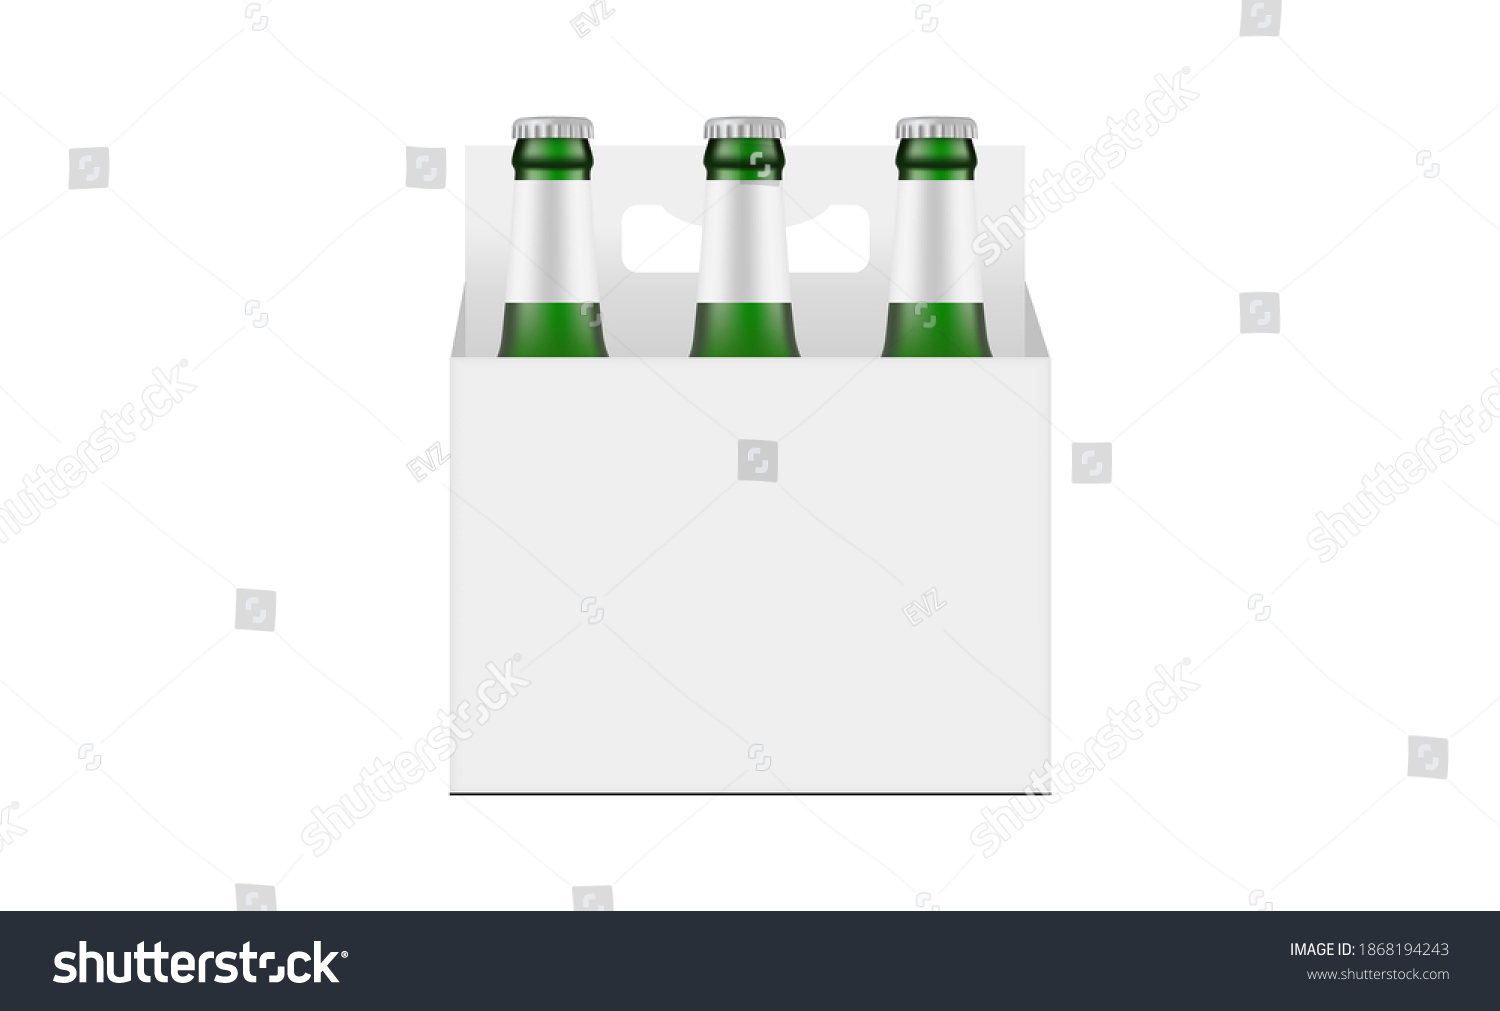 SVG of Paper Carrier Packaging Box Mockup With Green Glass Beer Bottles Isolated on White Background. Vector Illustration svg